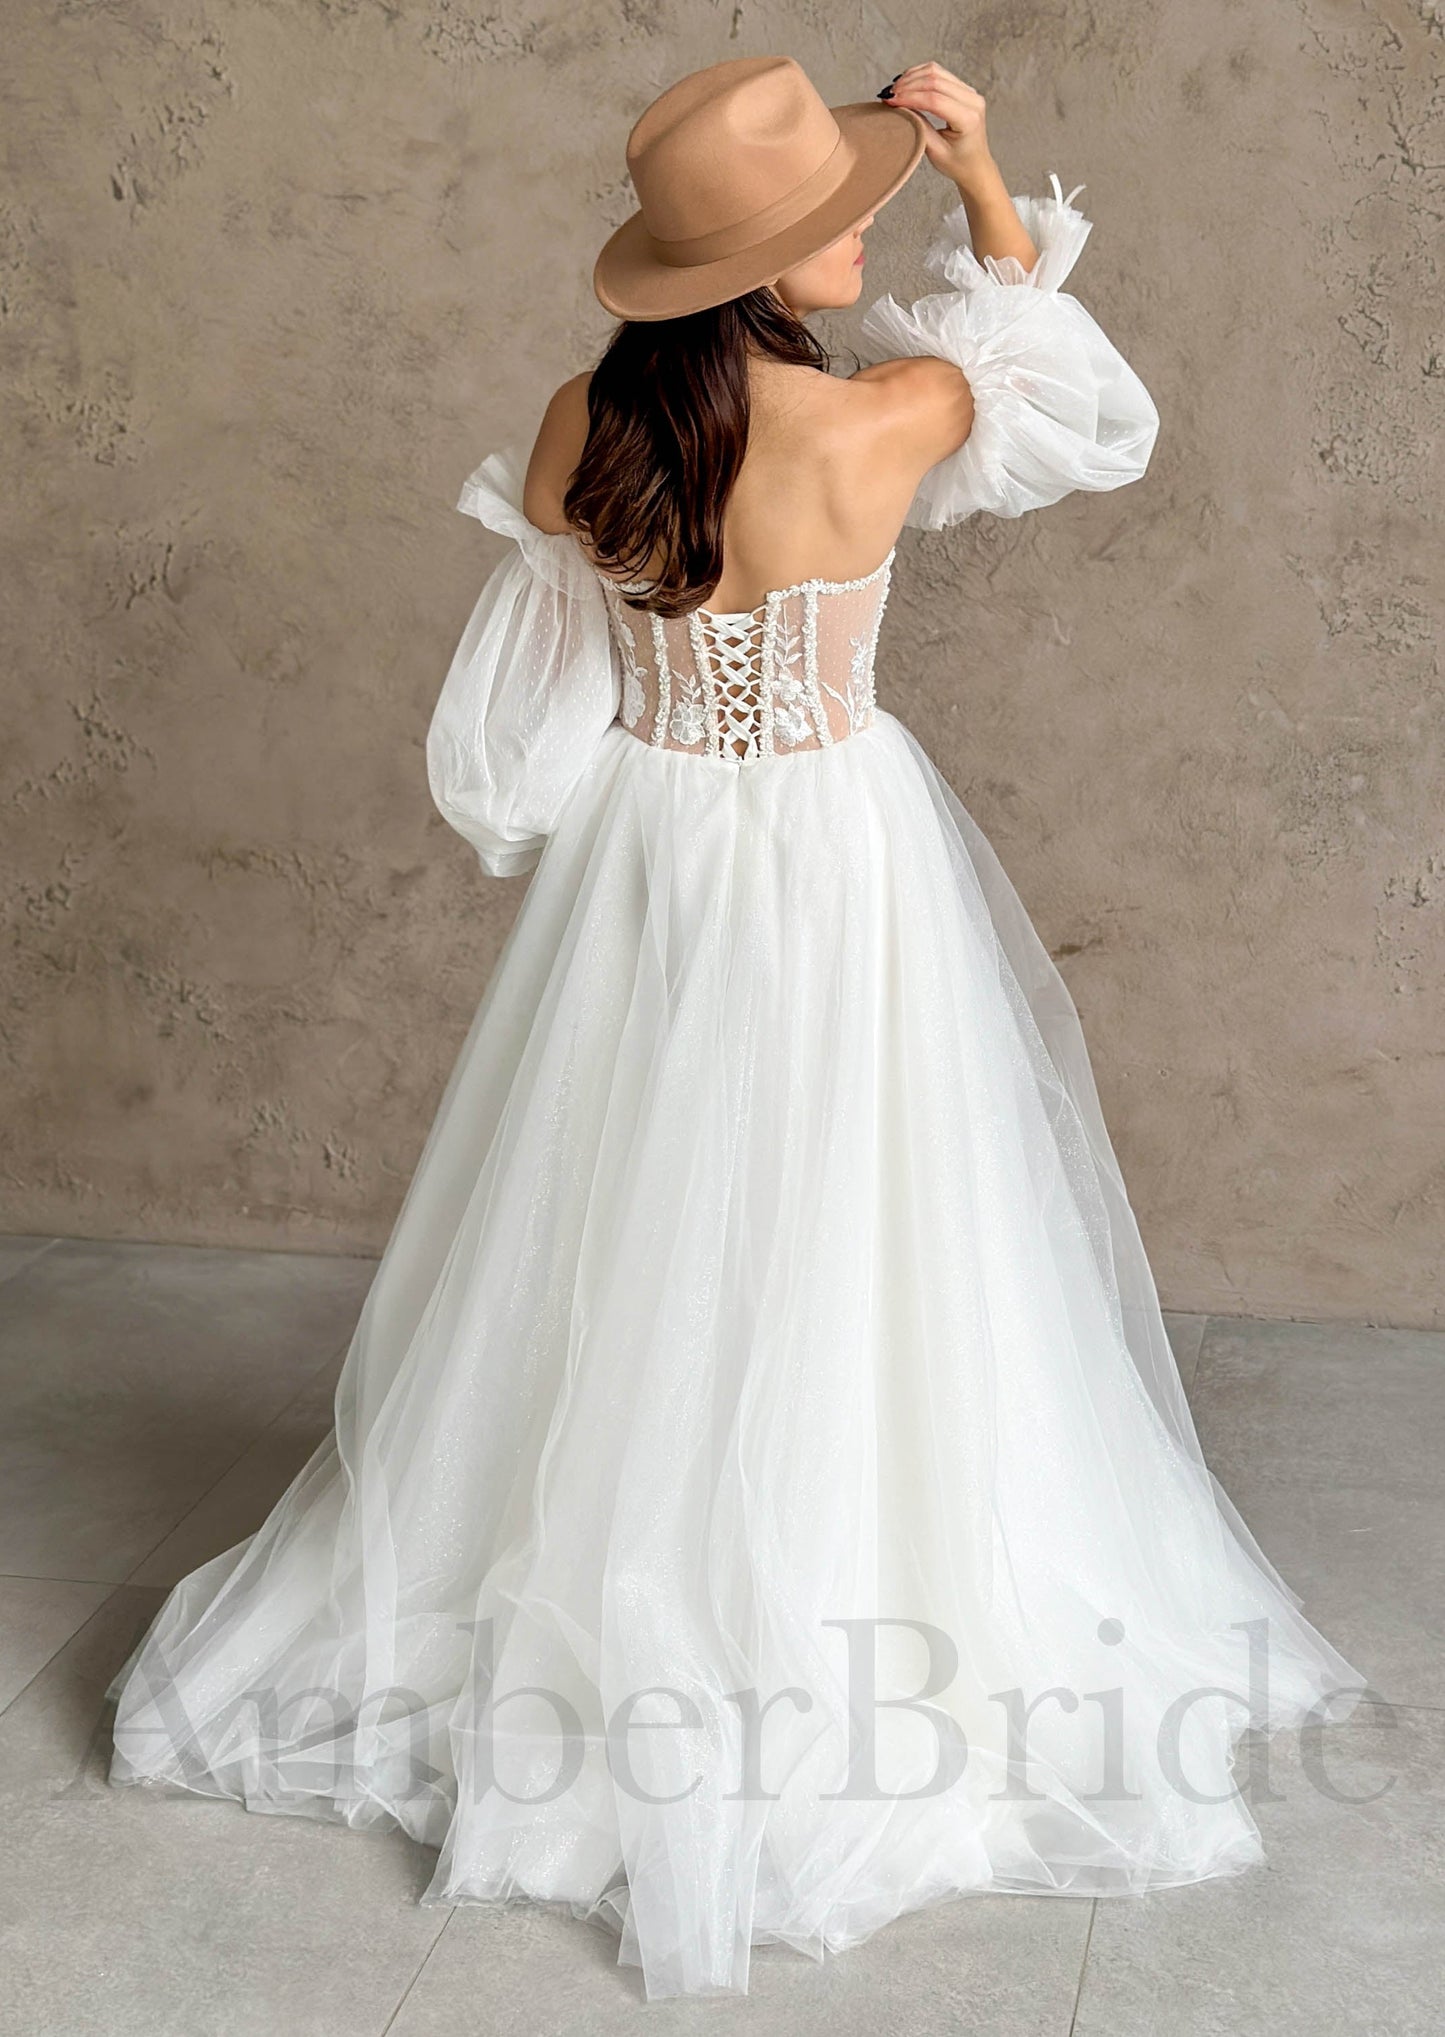 Rustic A Line Wedding Dress with Long Puffy Sleeves and Floral Accents